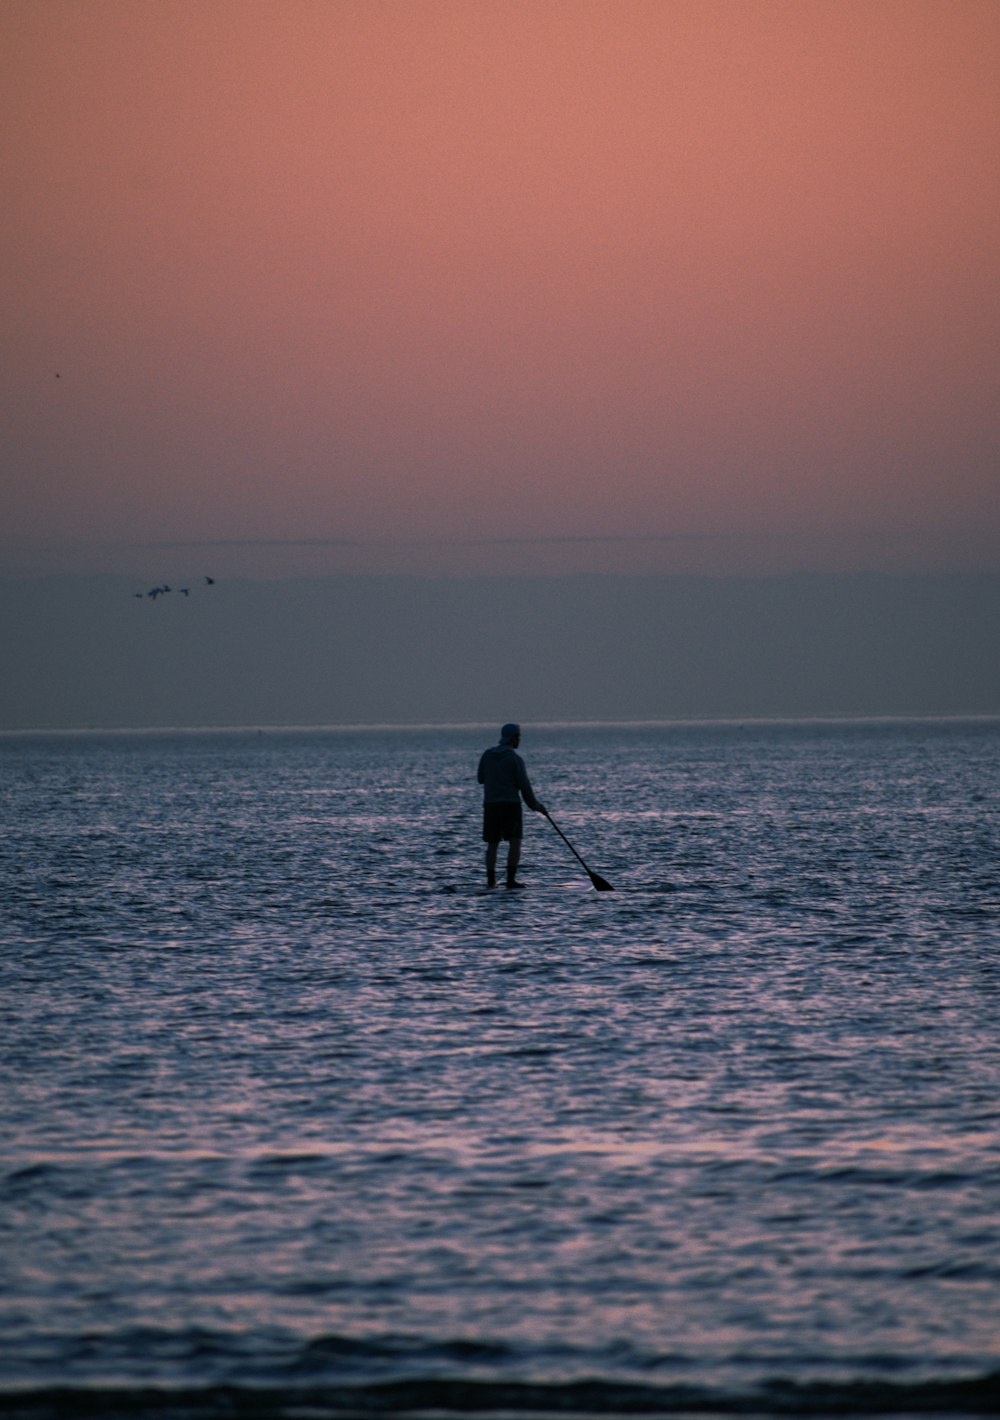 a man standing on a paddle board in the ocean